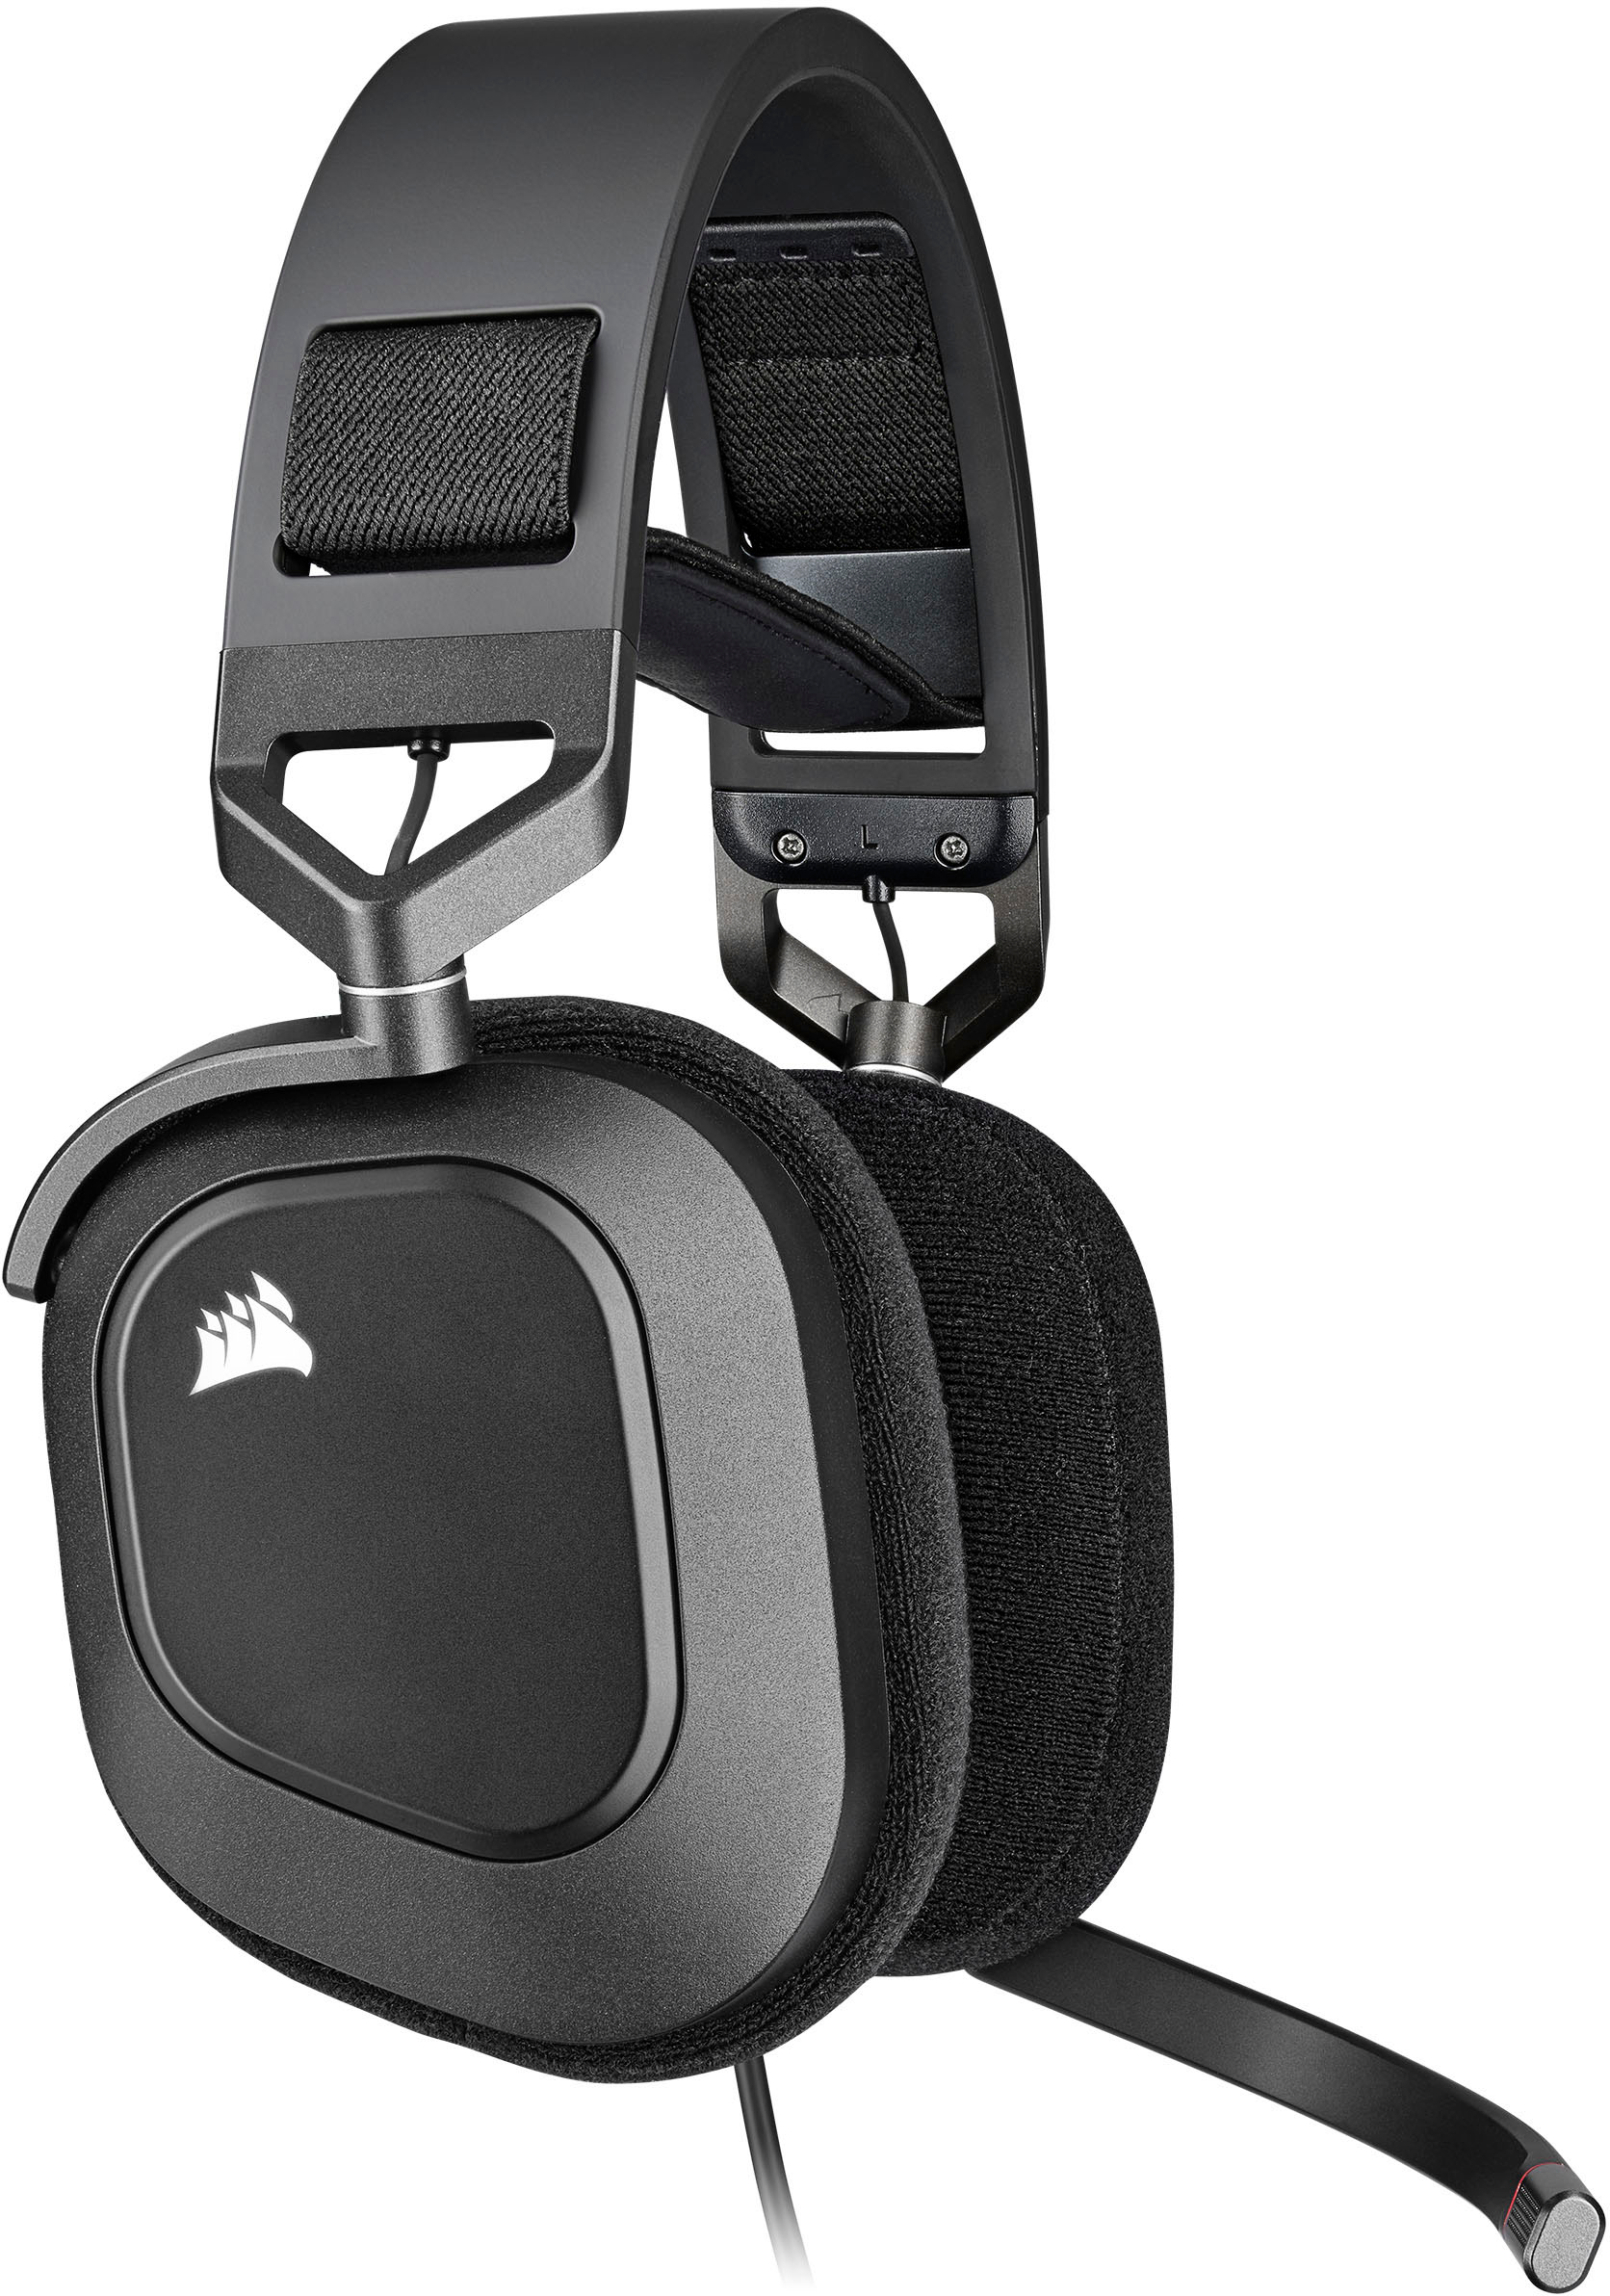 Angle View: CORSAIR - HS80 RGB Wired Gaming Headset for PC - Carbon